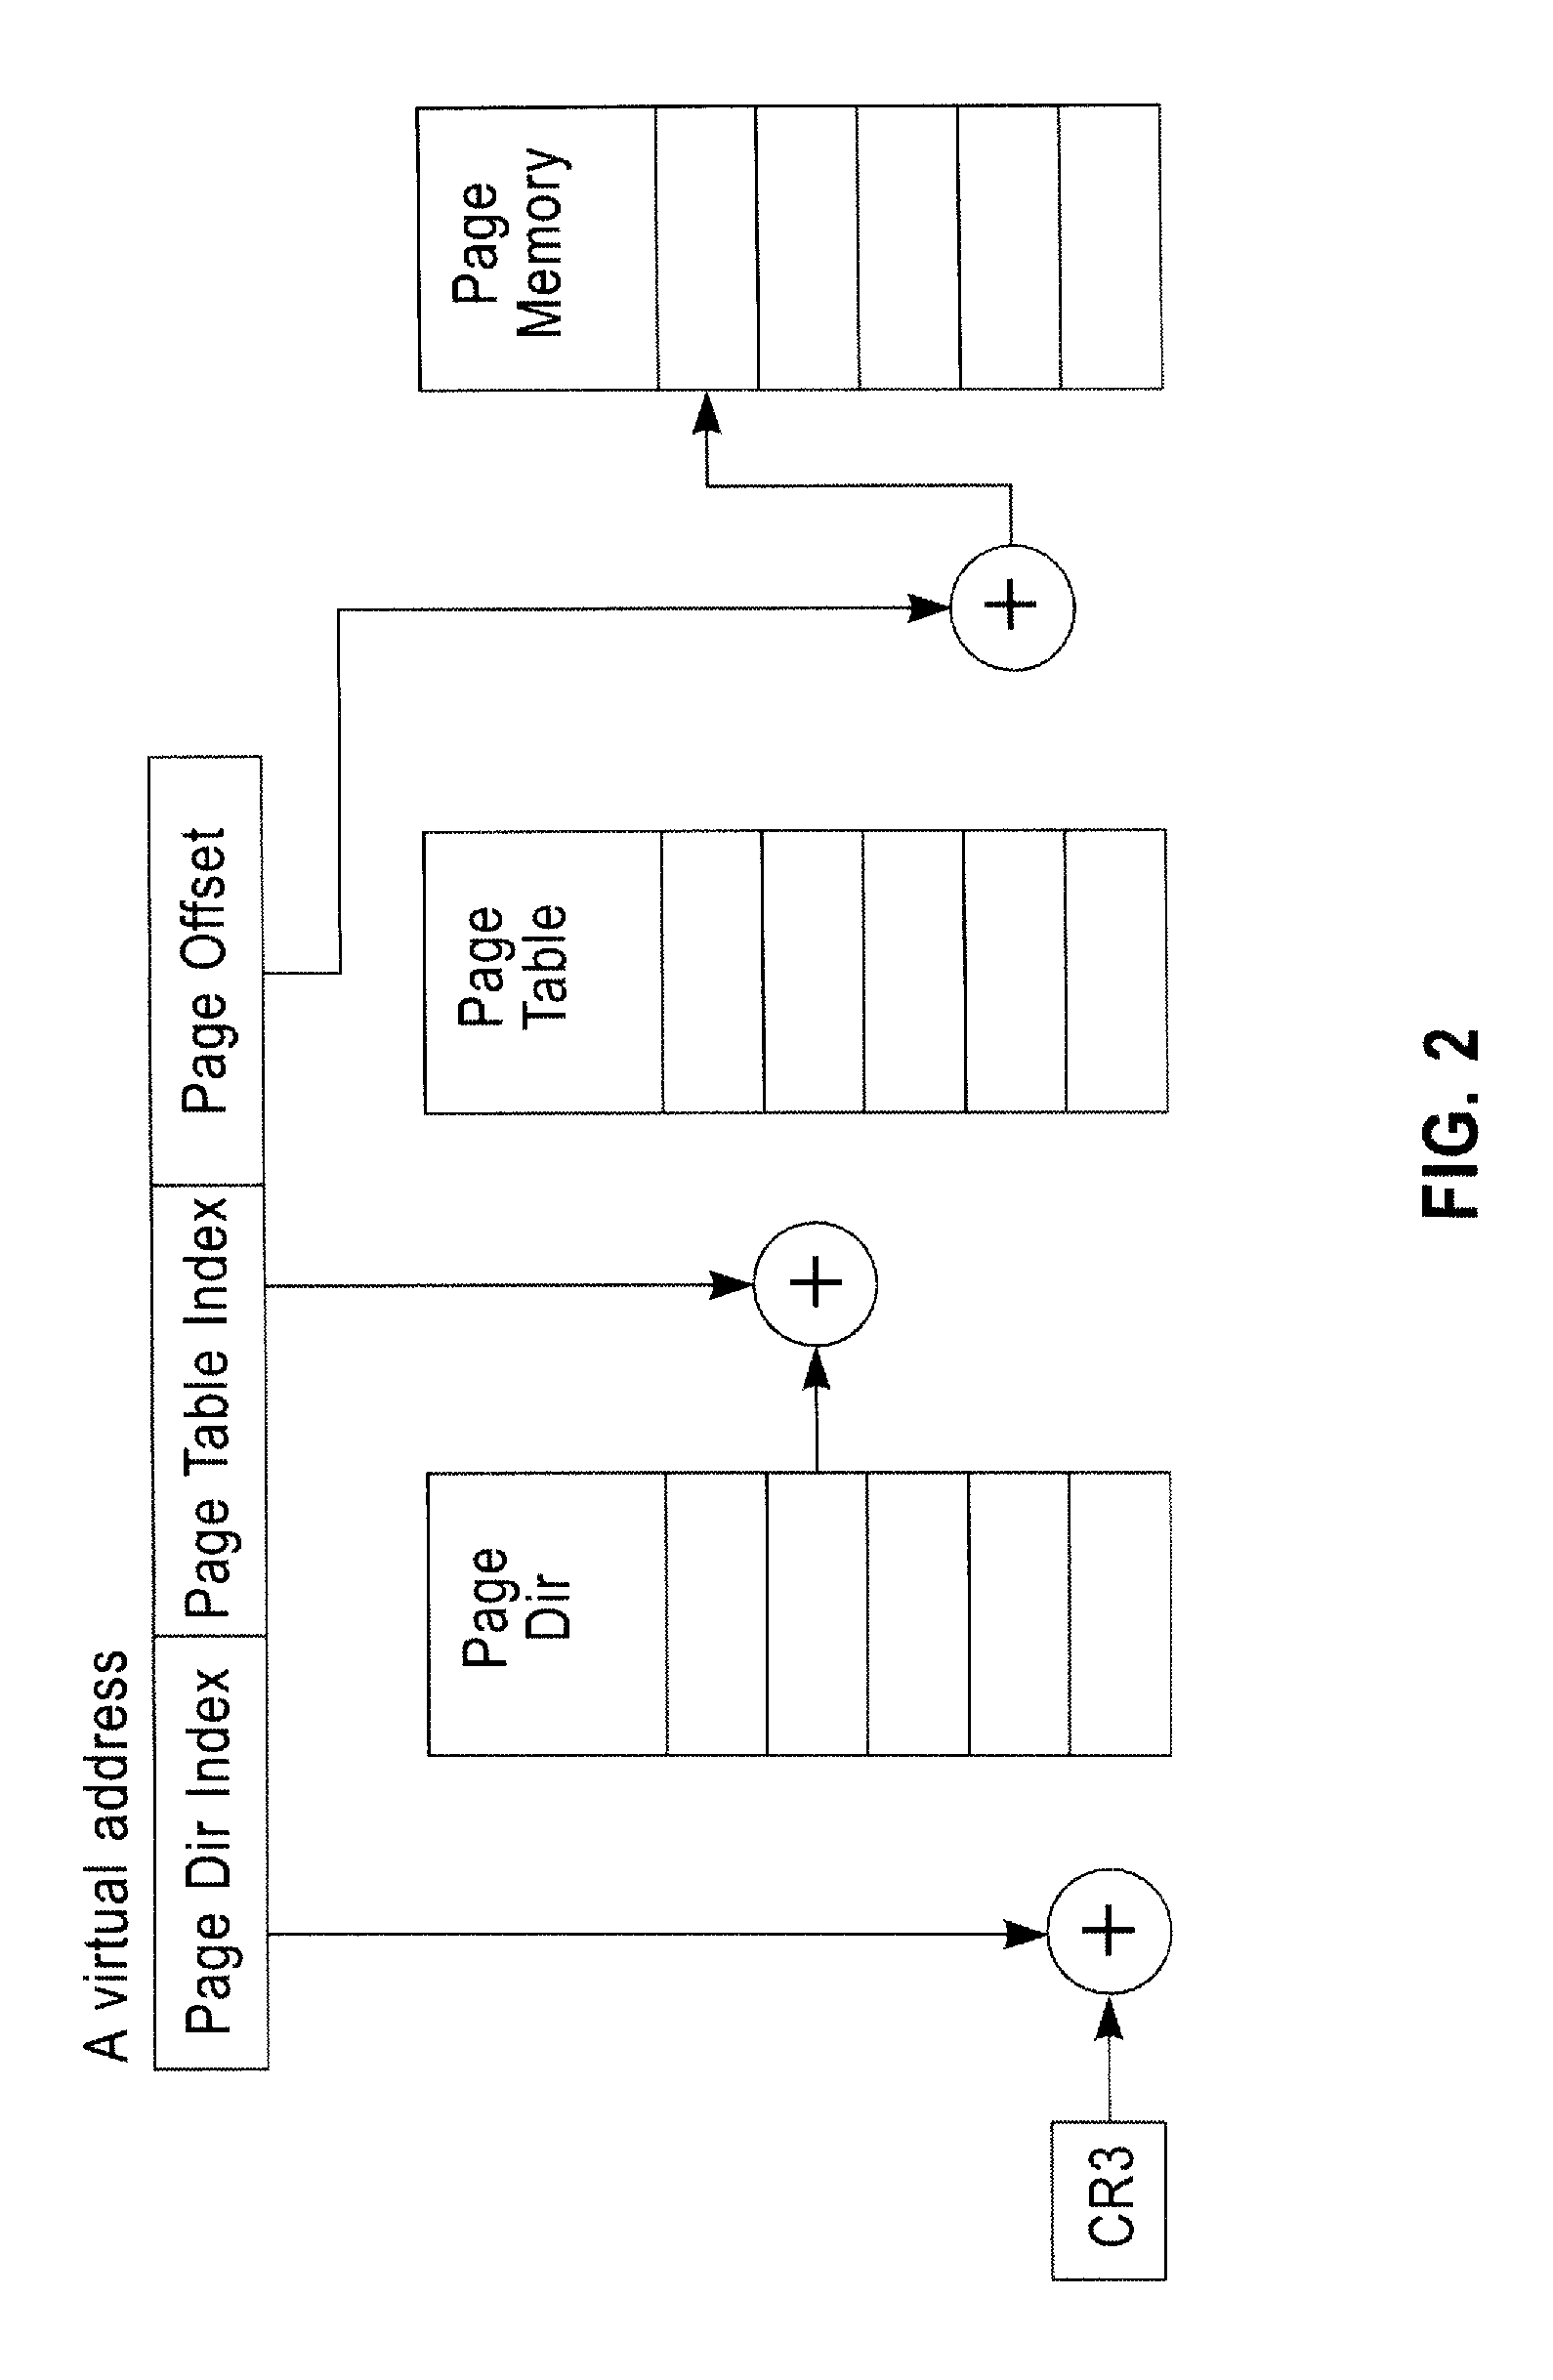 Full-system ISA emulating system and process recognition method